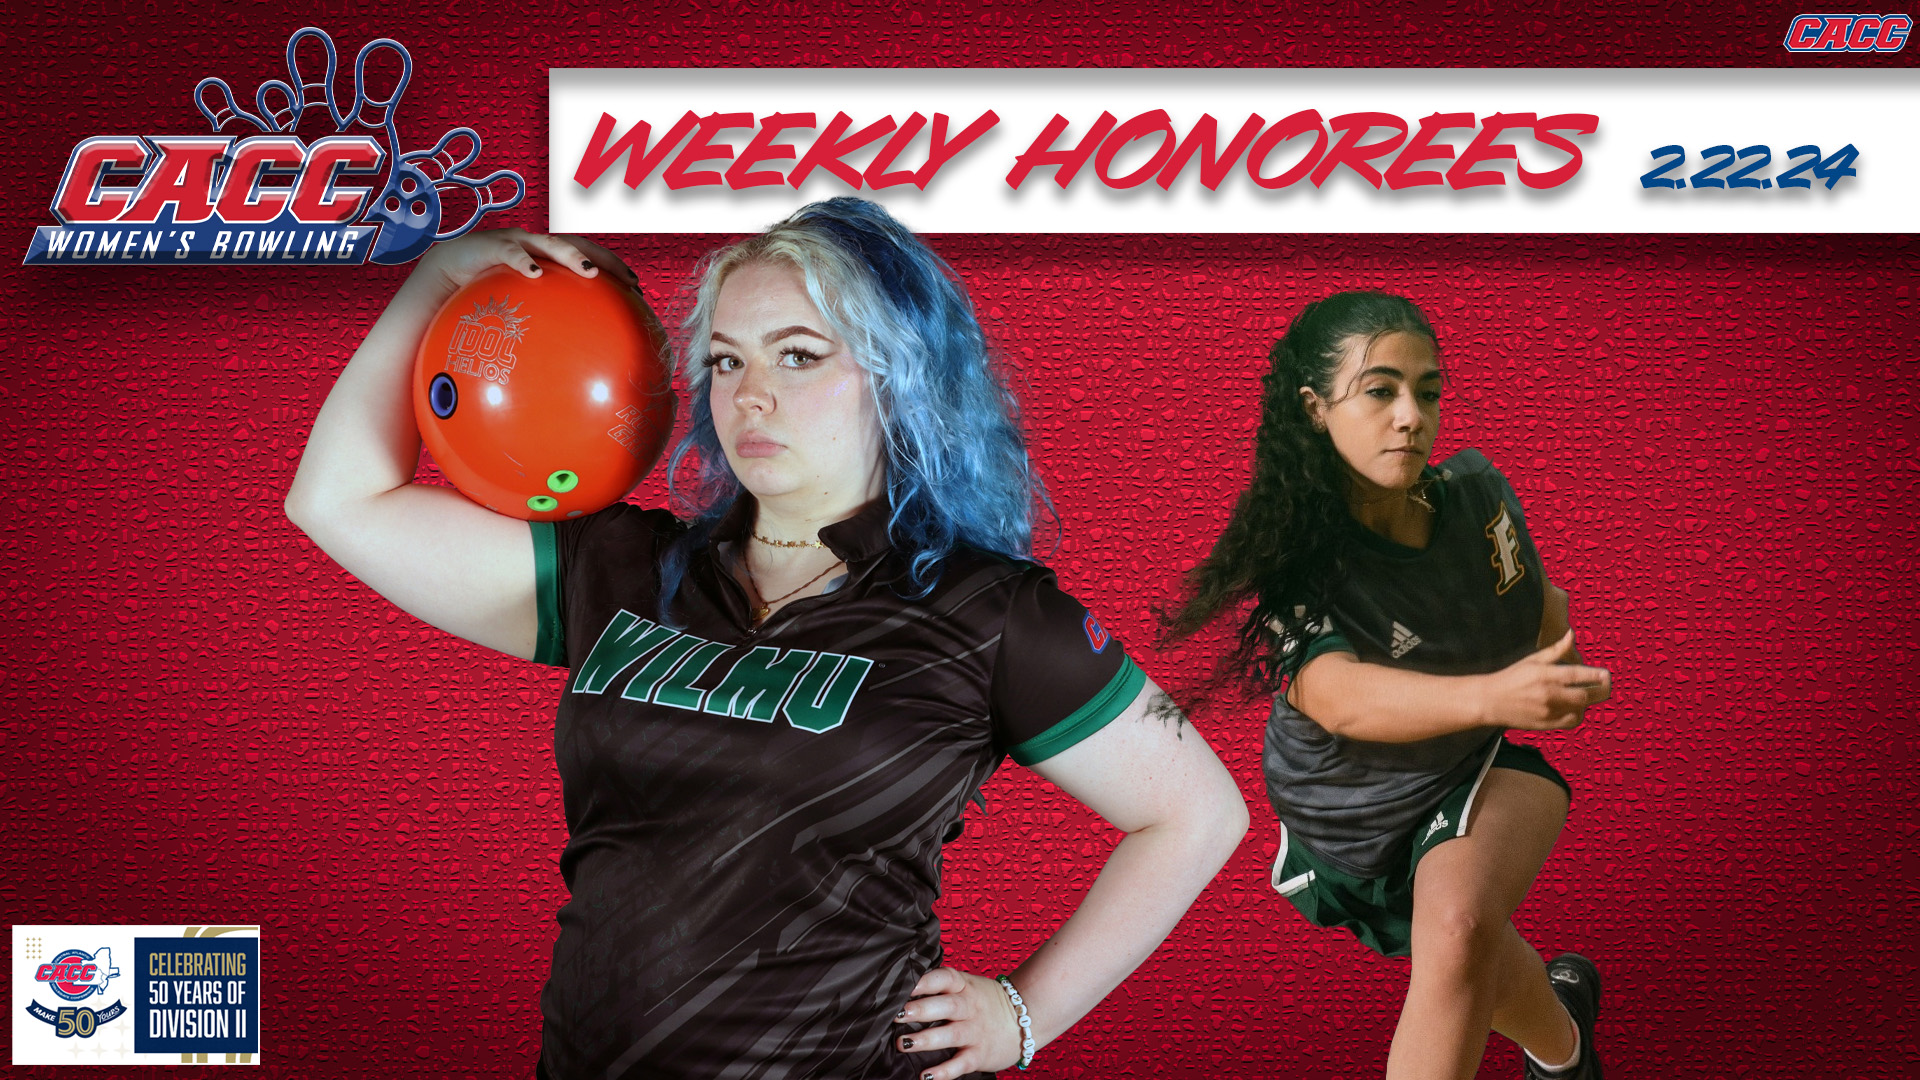 CACC Women's Bowling Weekly Honorees (2-22-24)